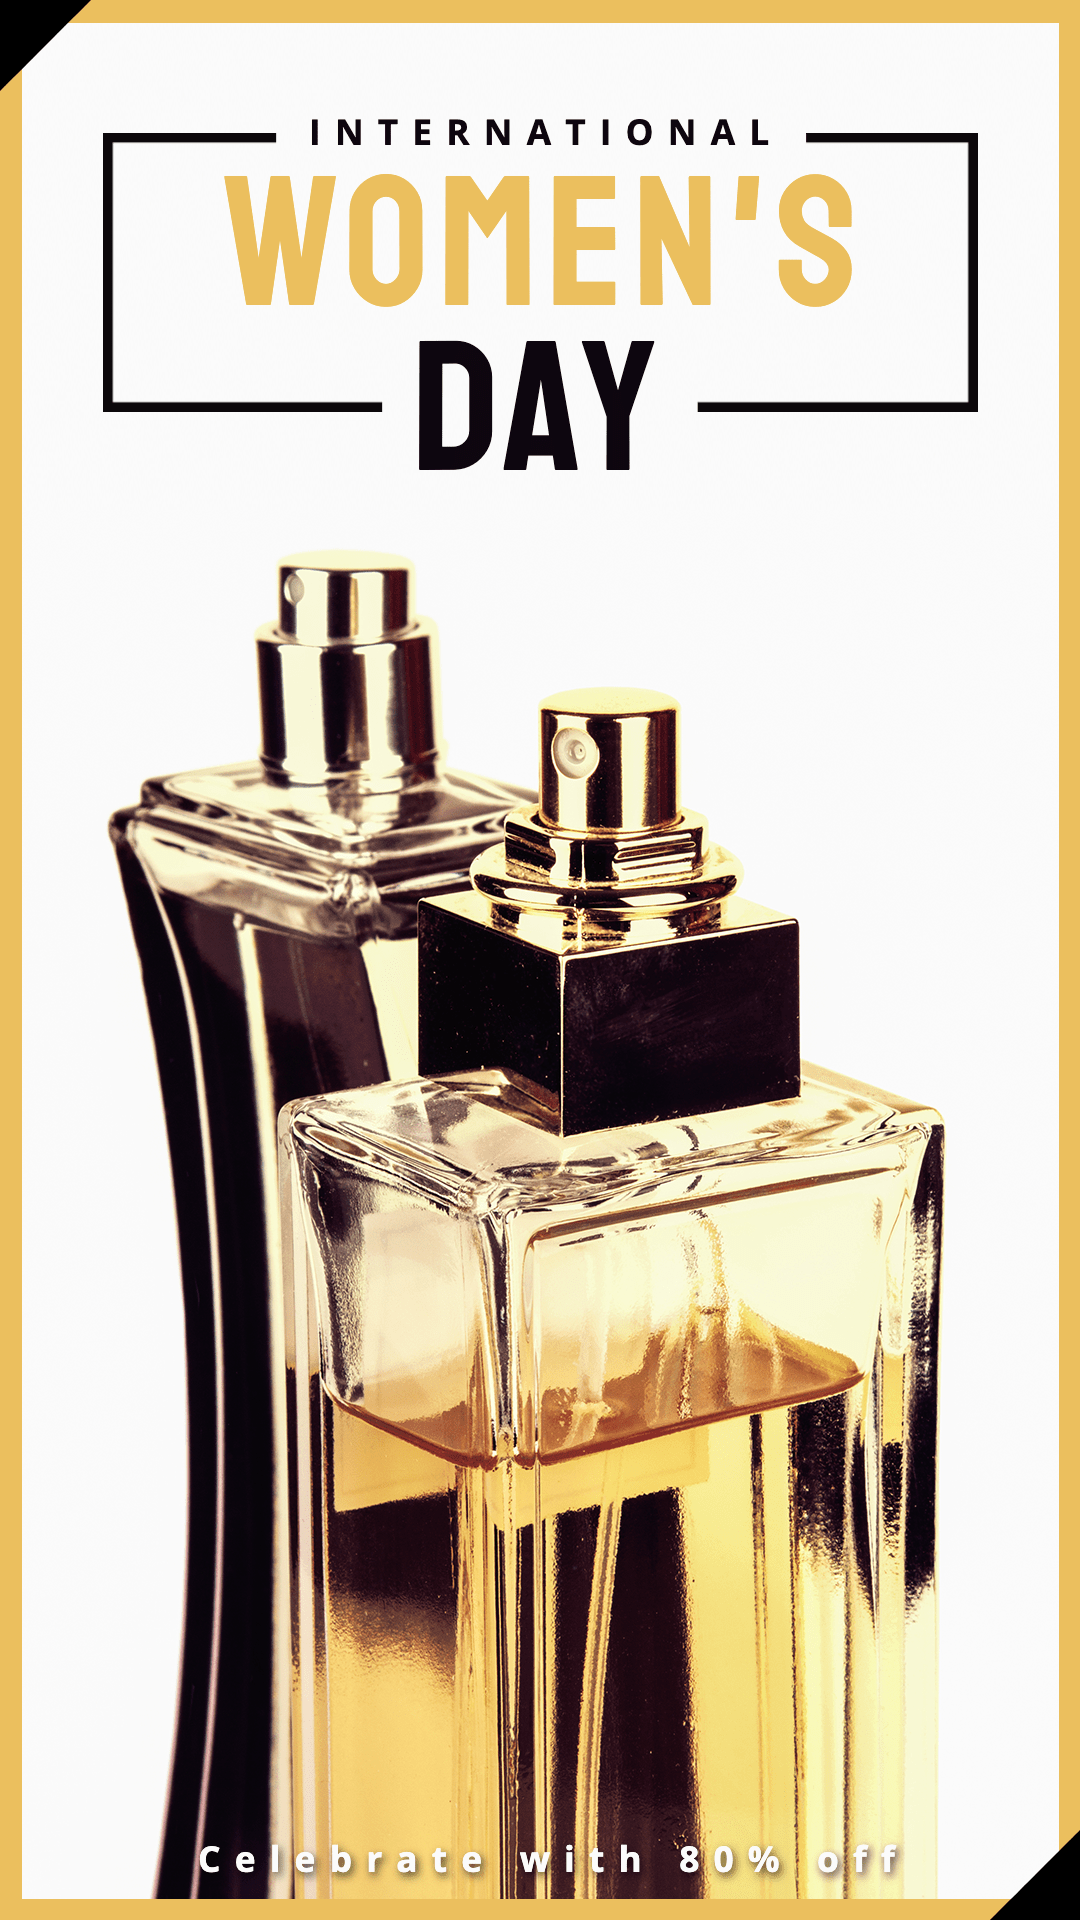 Women's Day Perfume Fragrance Sale Promotion Ecommerce Story